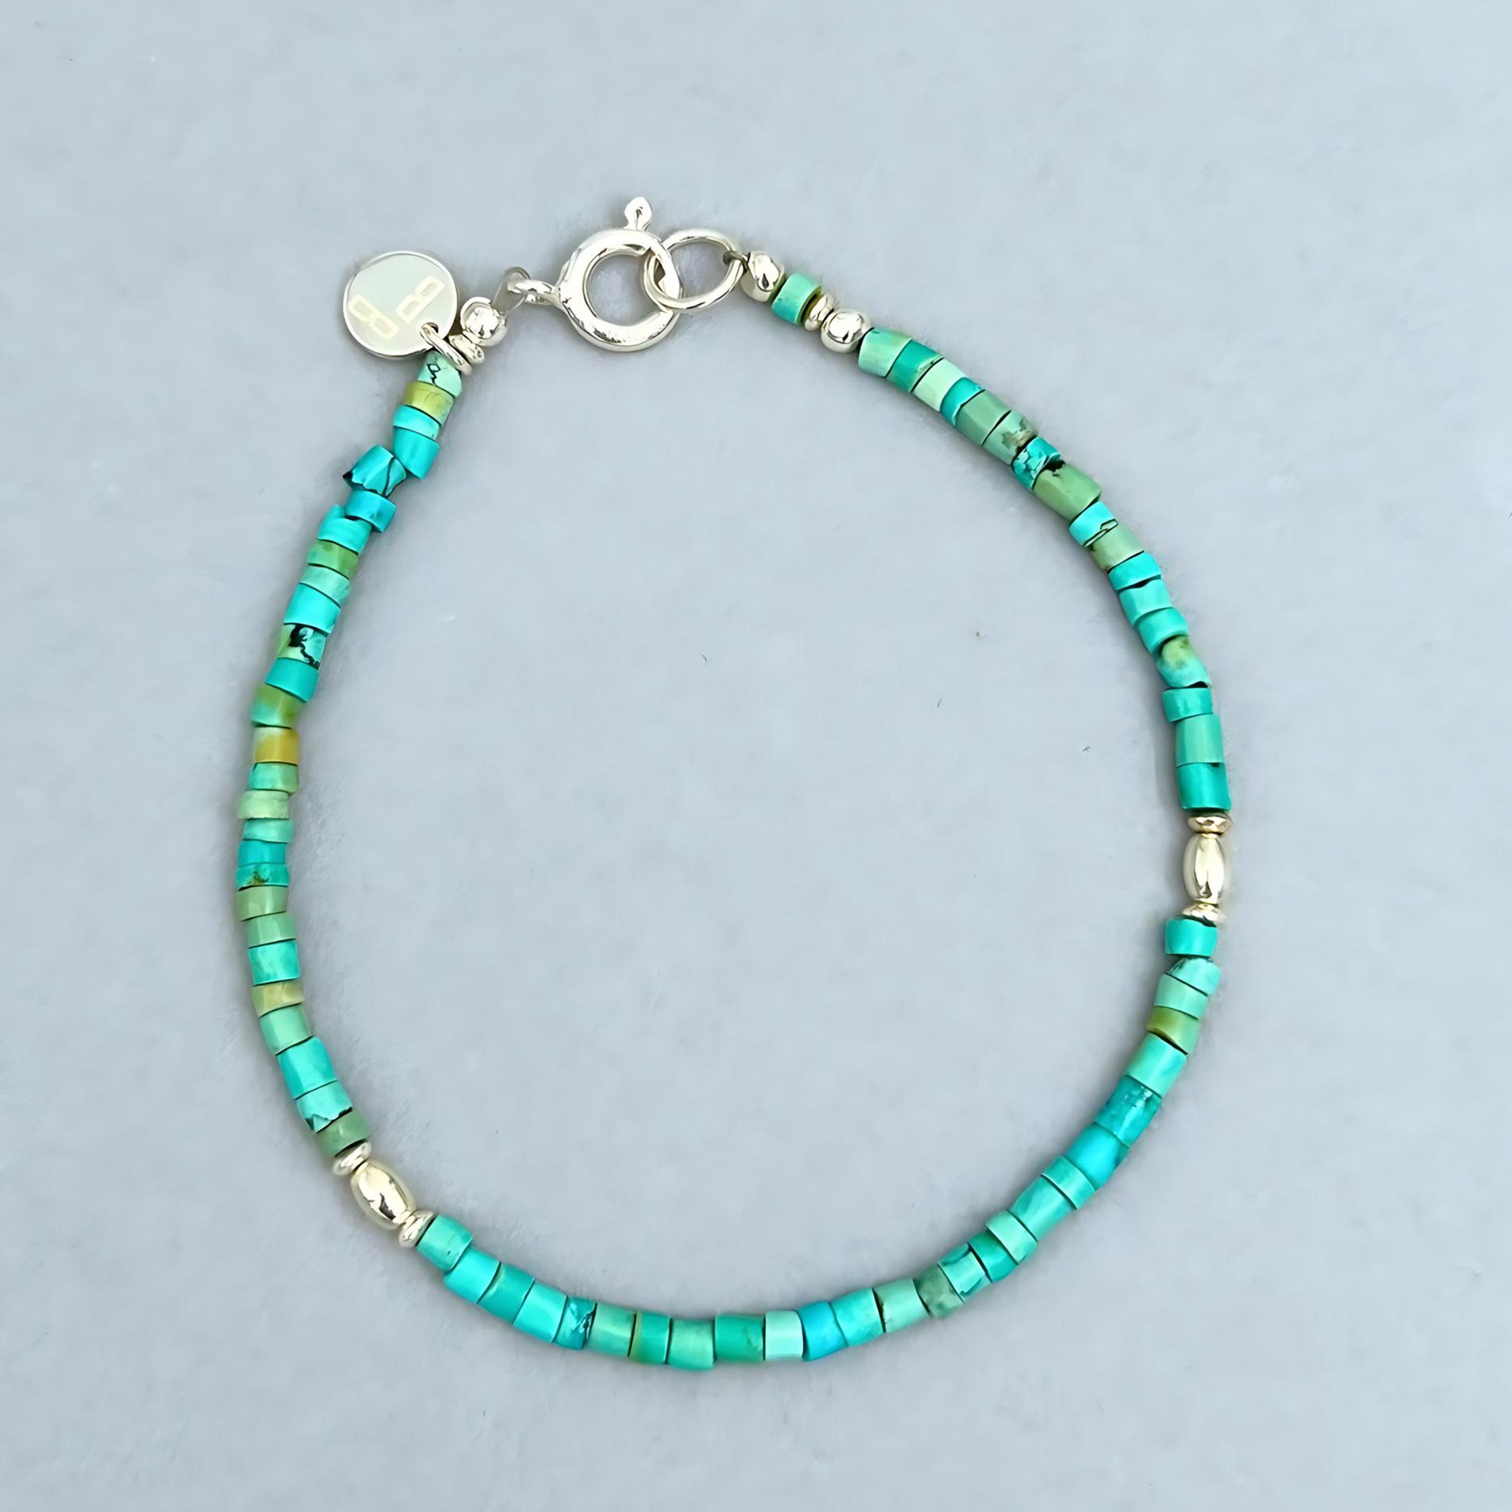 Le BijouBijou Men's Bracelet Surfer's Paradise made with Turquoise and Sterling Silver.